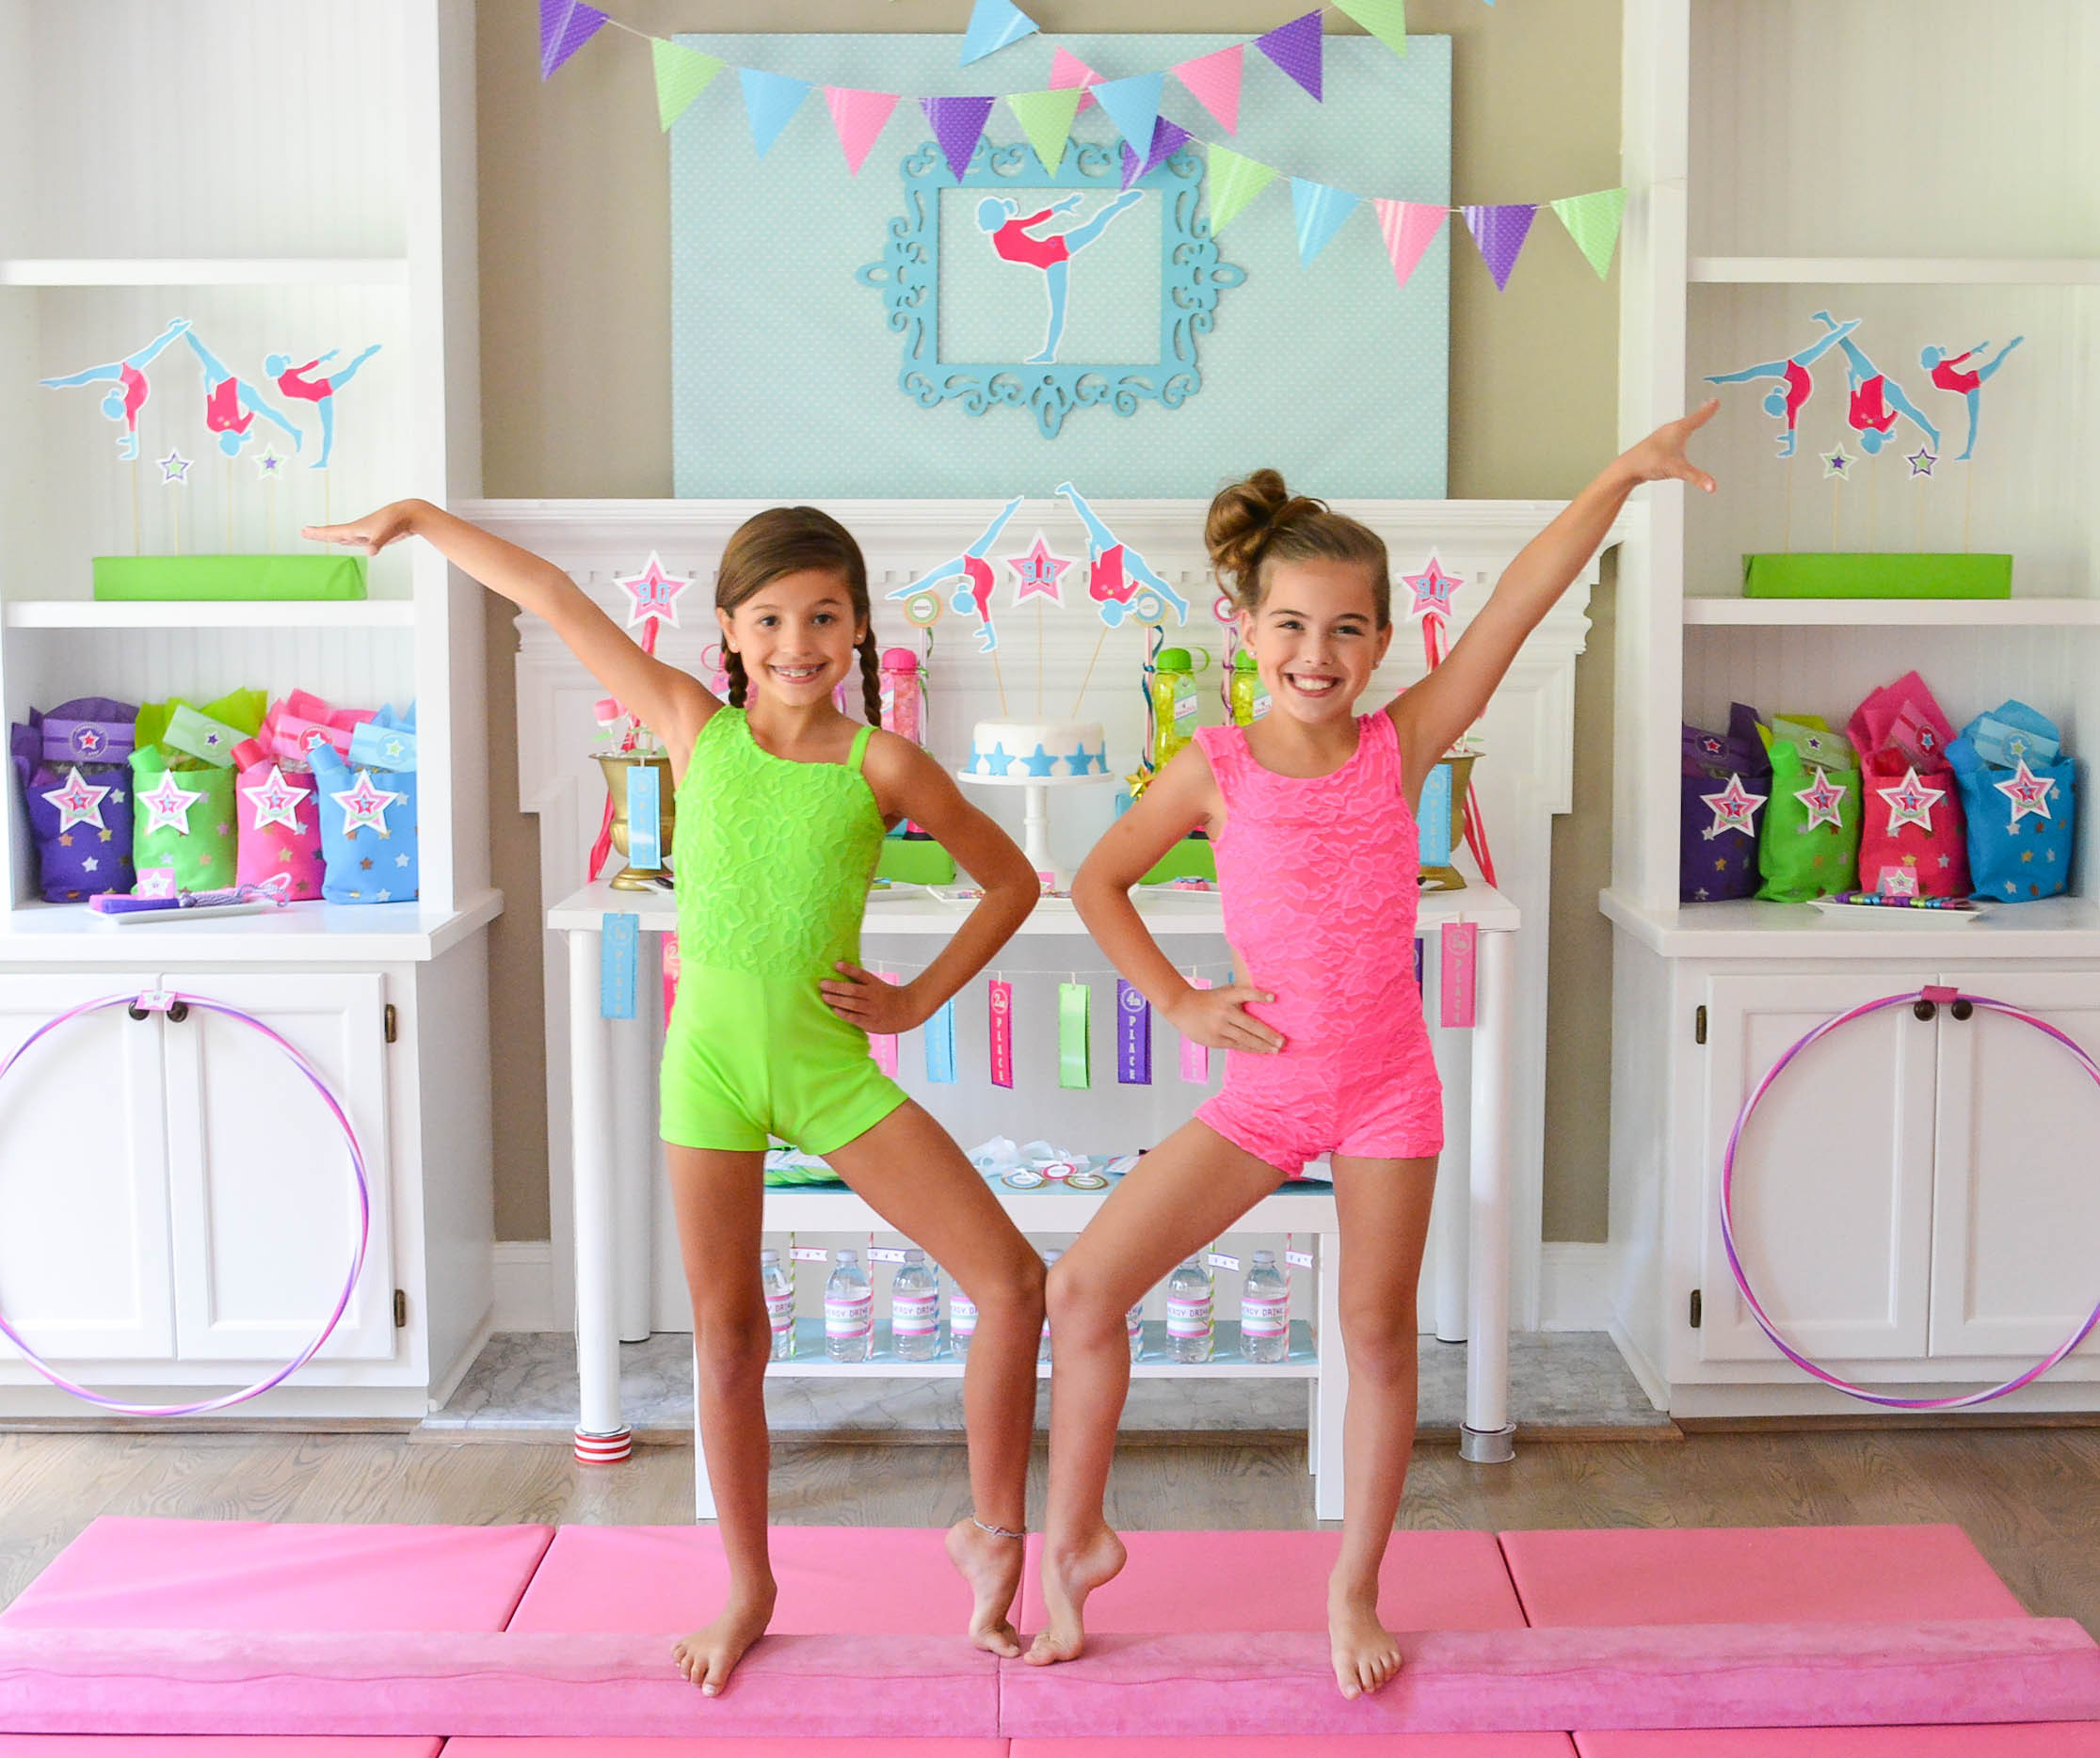 Pool Party Ideas For 12 Year Olds
 Gymnastics birthday